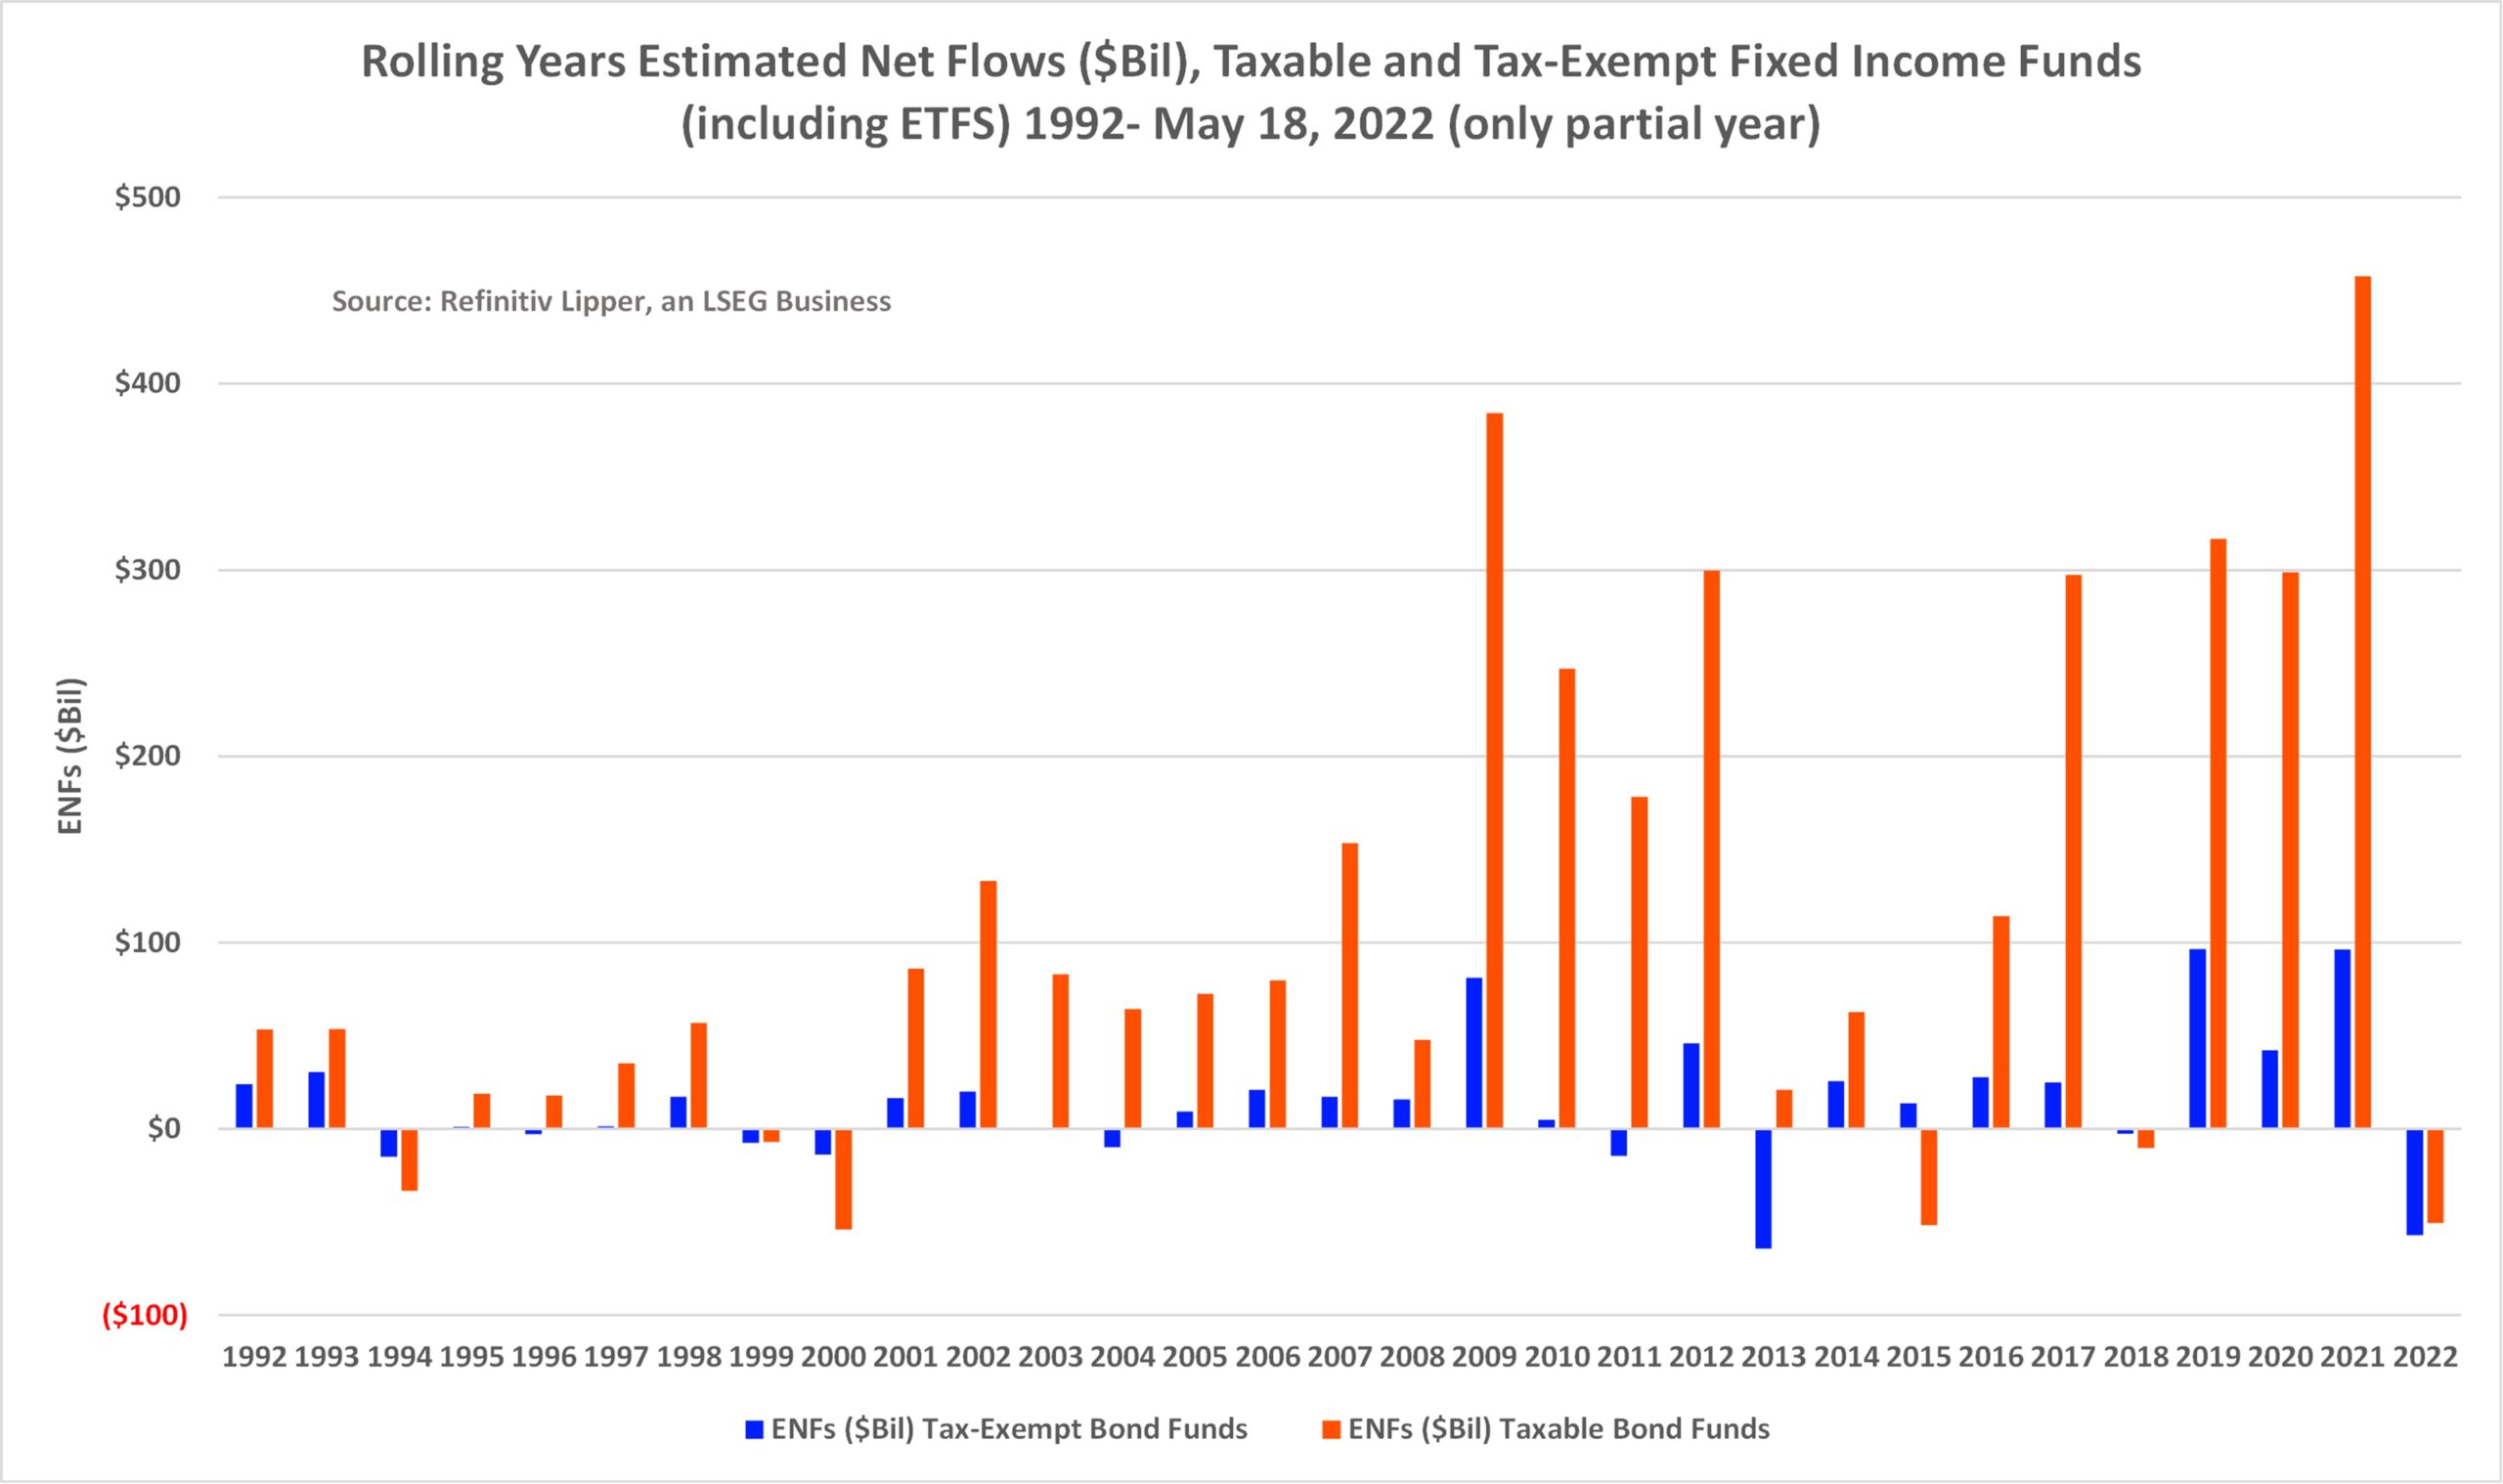 Rolling Years ENFs Taxable & Tax Exempt Bond Funds 1992-2022